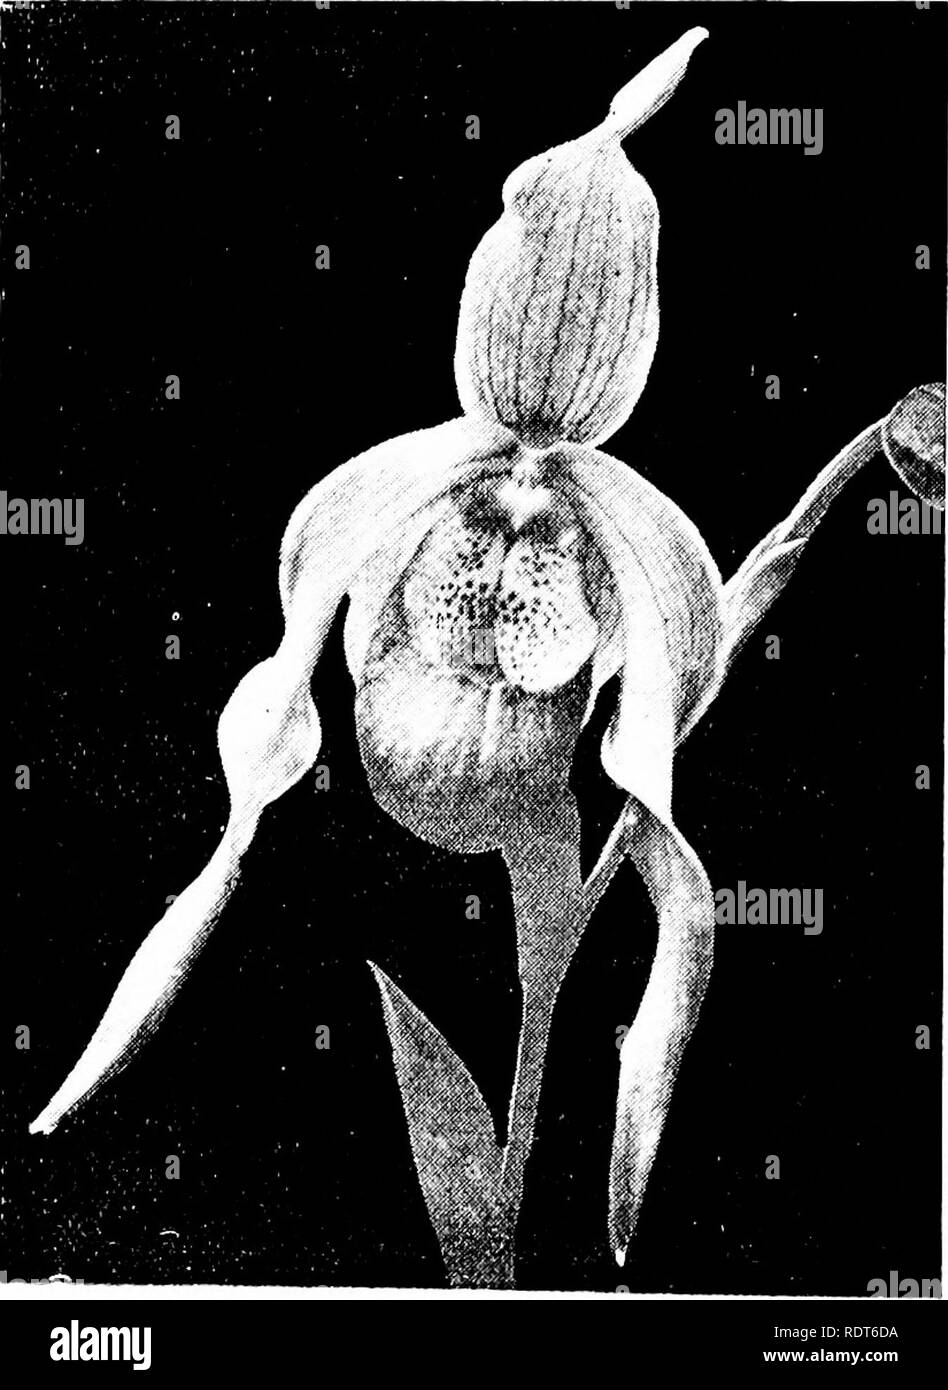 . The orchid stud-book: an enumeration of hybrid orchids of artificial origin, with their parents, raisers, date of first flowering, references to descriptions and figures, and synonymy. With an historical introduction and 120 figures and a chapter on hybridising and raising orchids from seed. Orchids. 230 THE ORCHID STUD-BOOK. [Part II In the last-mentioned the pale P. caudatum Wallisii was the pollen parent. 25. P. X Perseus (Lindleyannm x Sedenii ? ).—Veitch, 1892. C. x Phaedra, G.C. 1893, i. 80; O.R. 1893, 61.—Veitch. S. X Phaedra, 0.7?. 1893, 52. C. x Perseus, G.C. 1892, ii. 622. S. x Per Stock Photo